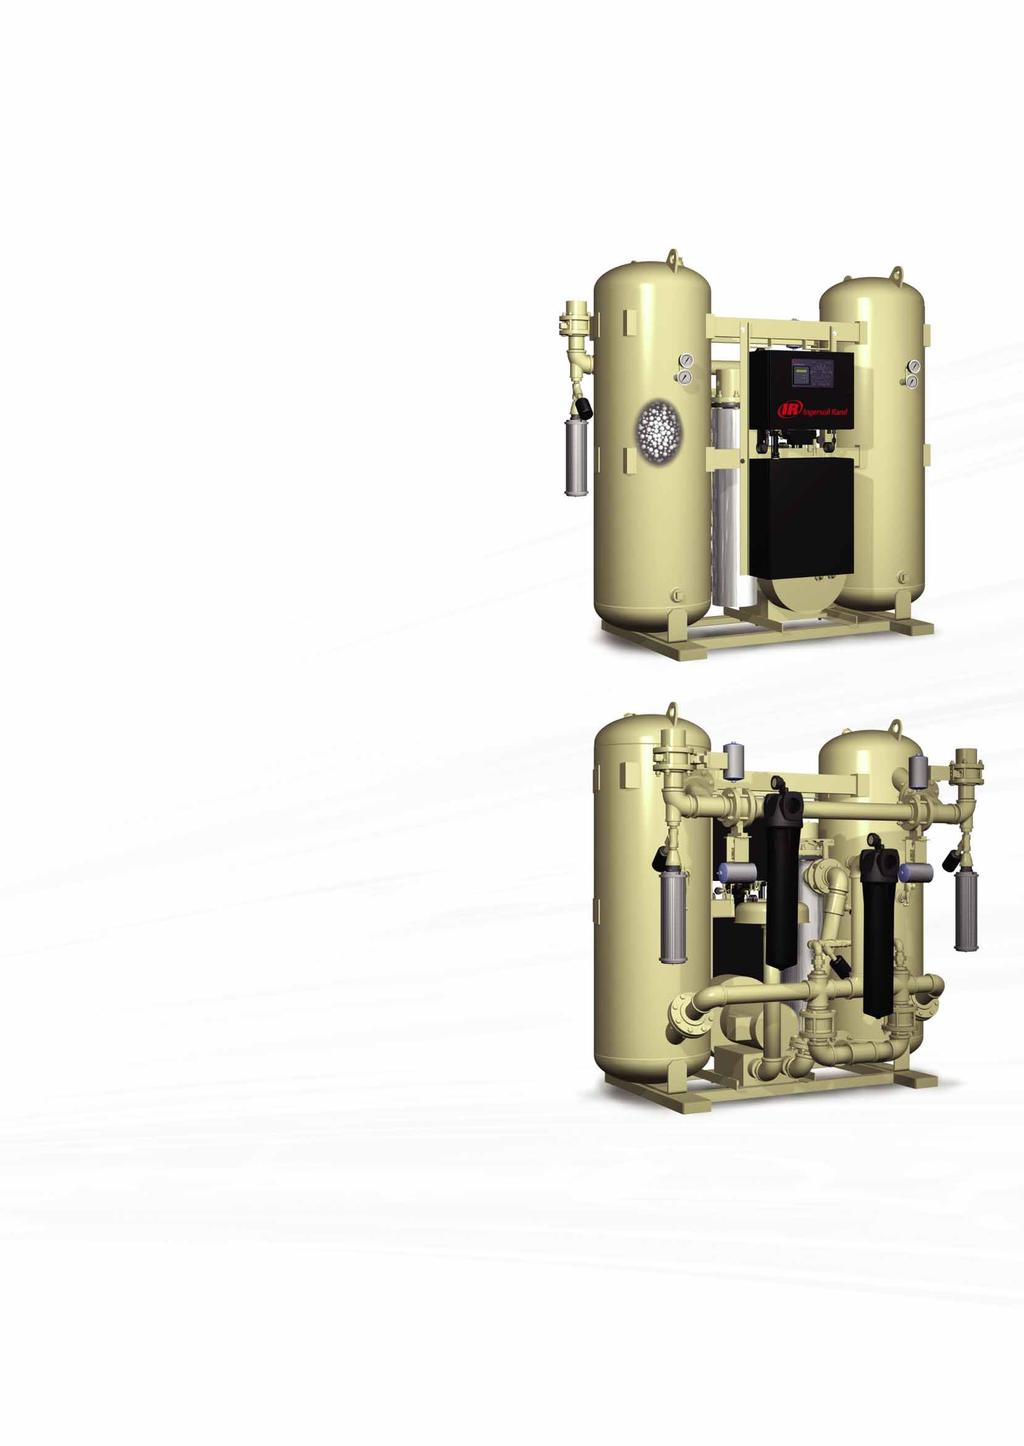 Desiccant Dryer Features and Benefits A Microprocessor Controller Controls valve switching to correctly direct air flow and operation of blowers and heaters.